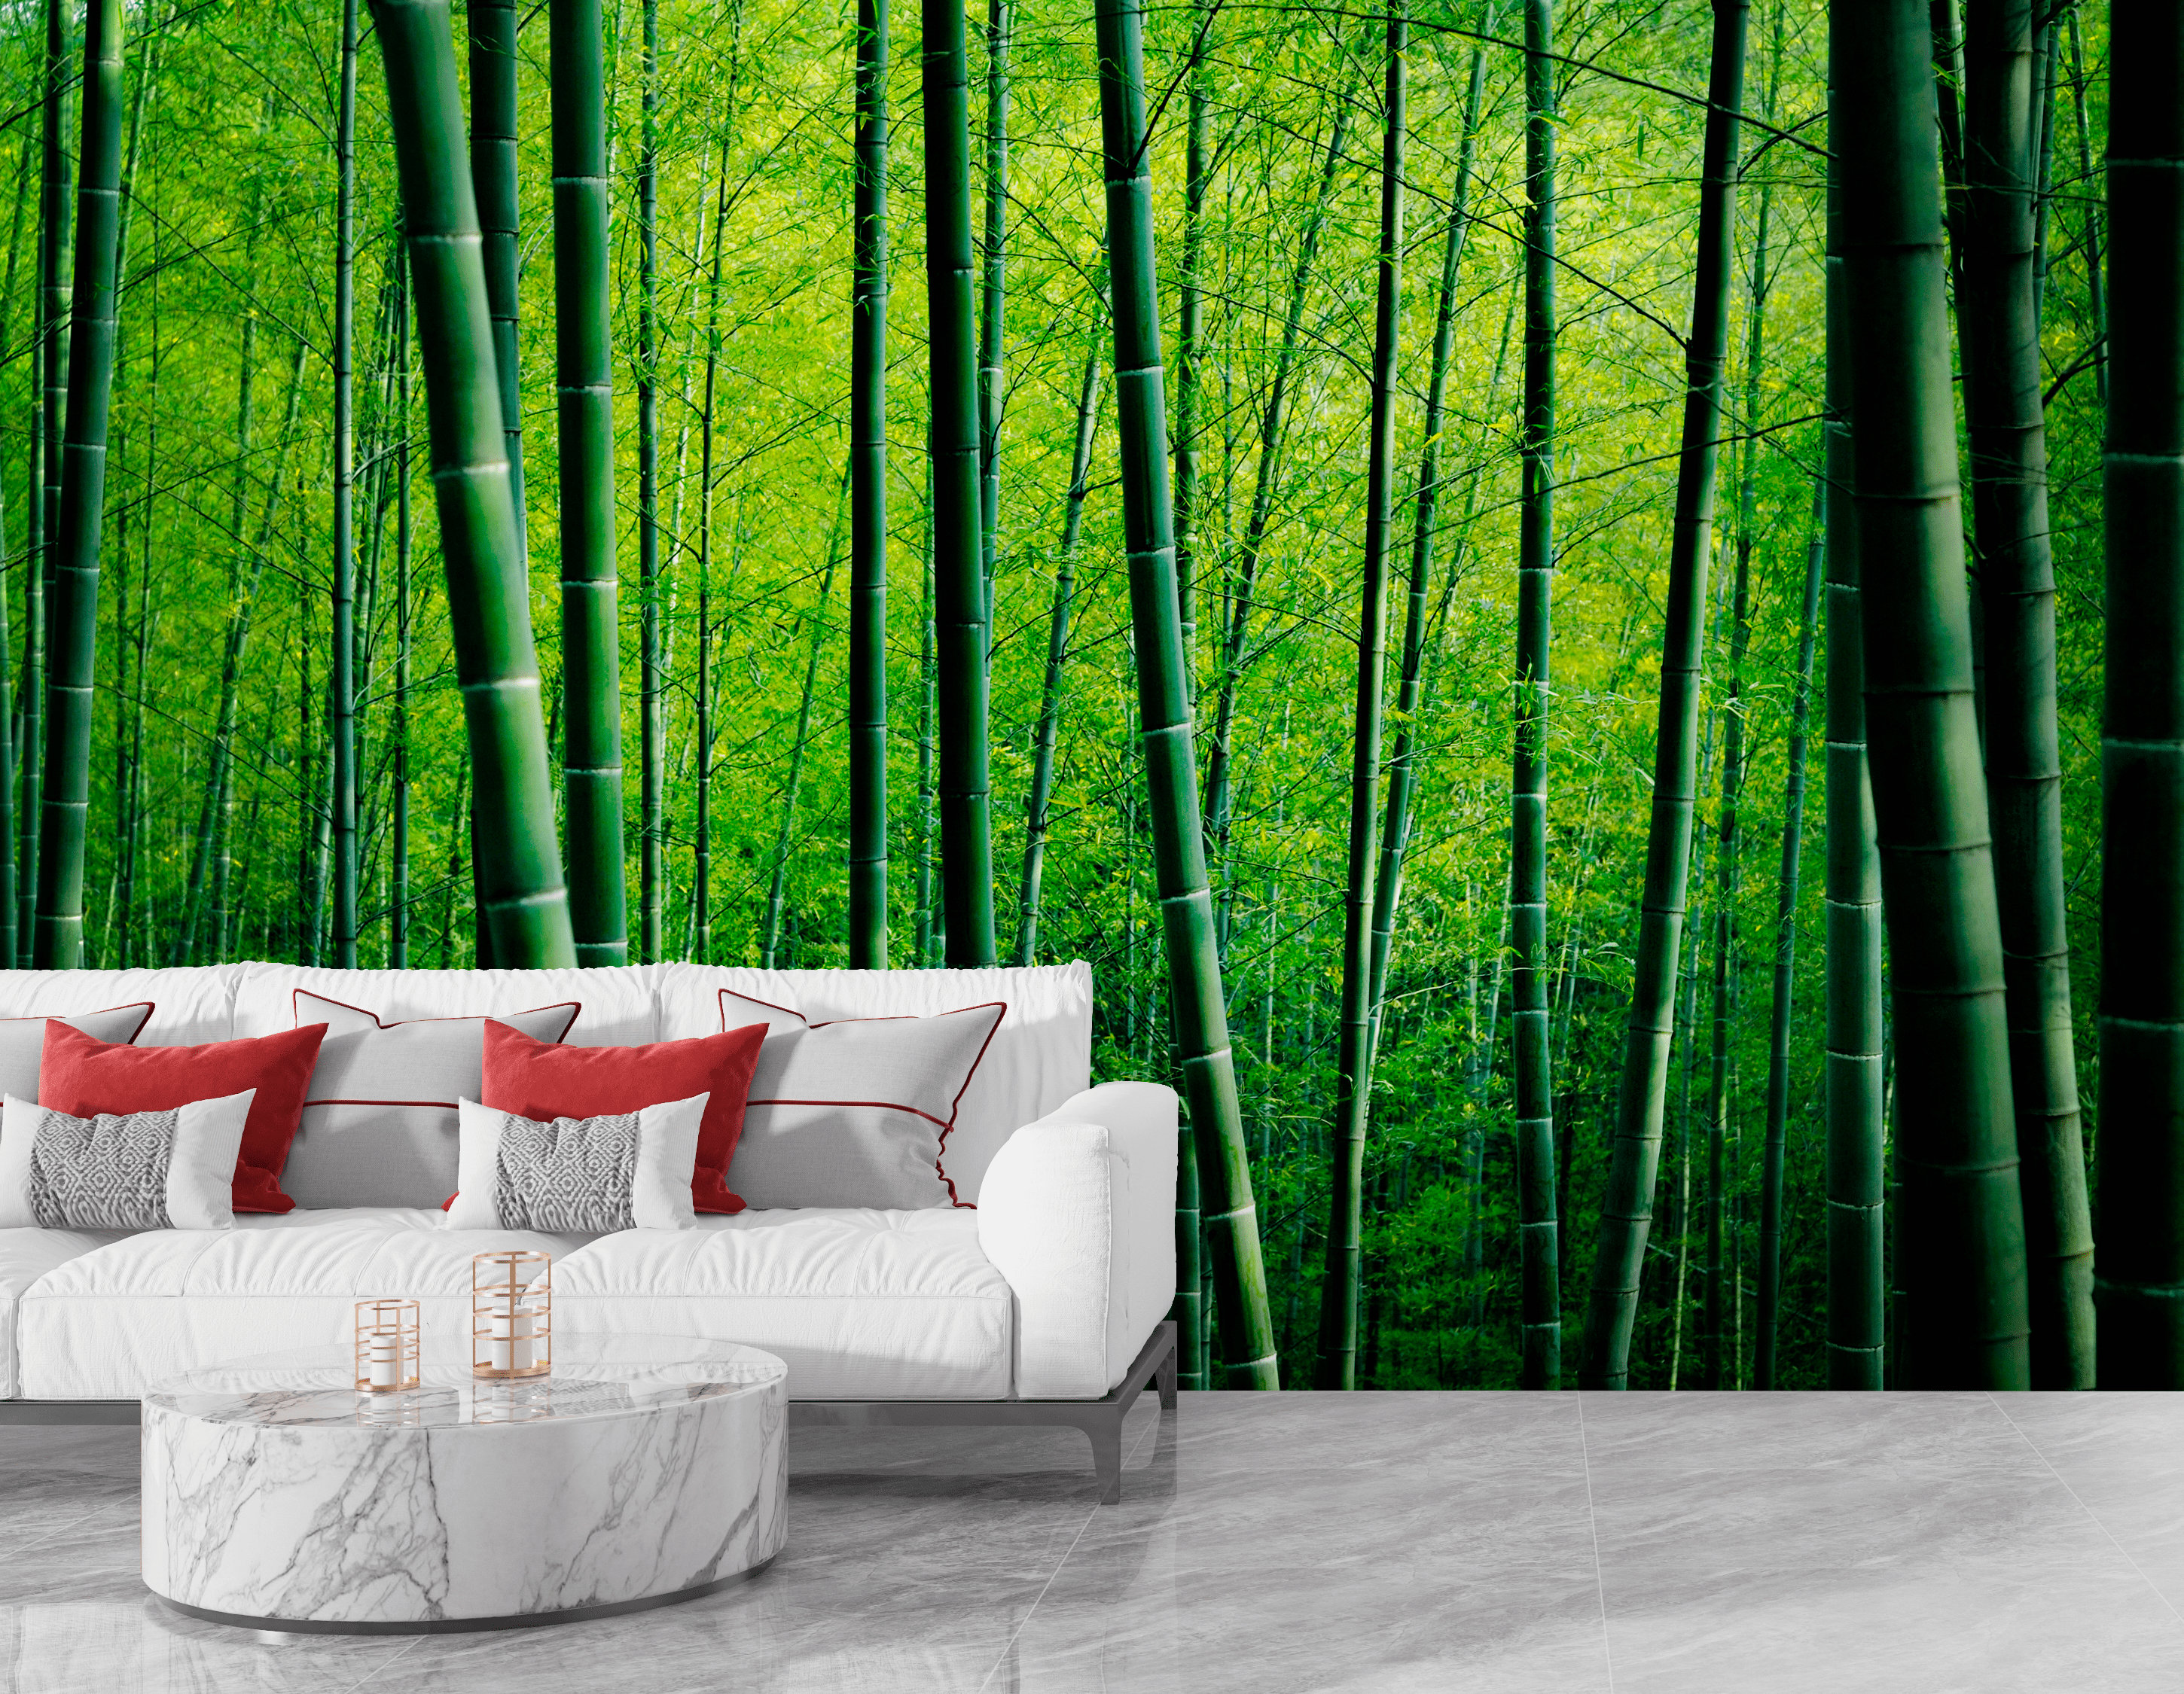 3D Bamboo Wallpaper, Fence Wall Mural, Light Brown Wall Decor, Old Wall  Wall Art, Peel and Stick, Removable Wallpaper, Wall Sticker 